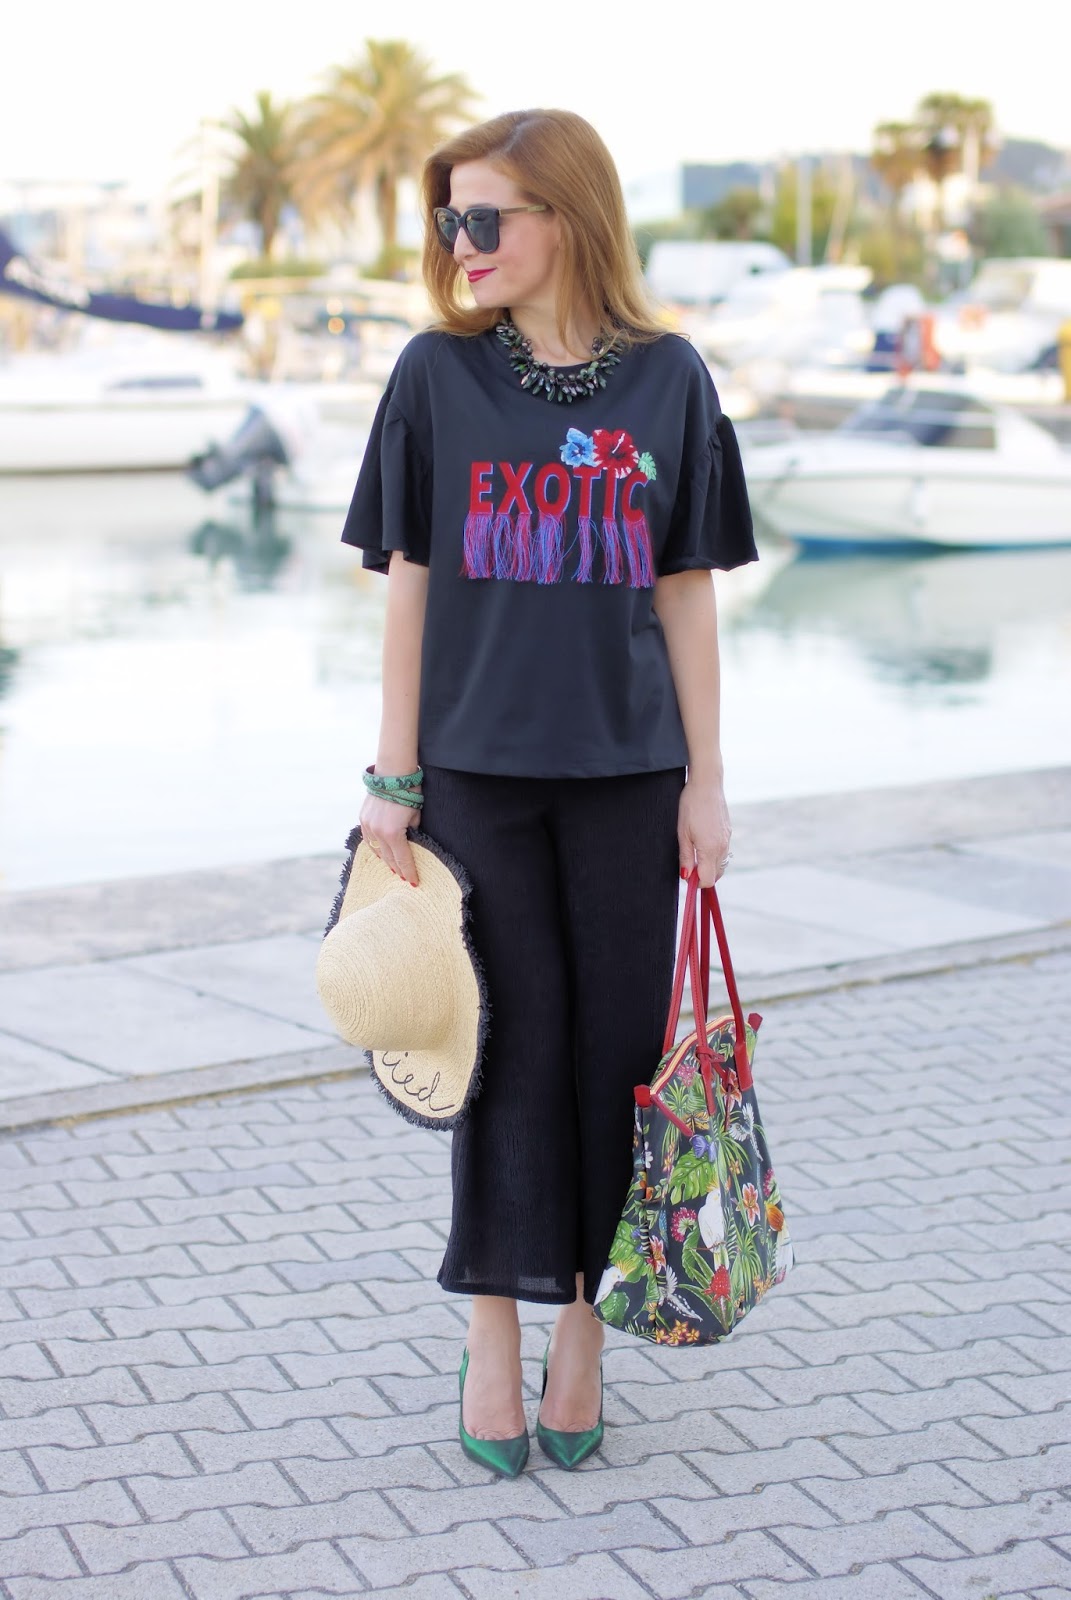 Tropical print trend with Robertina bag by Roberta Pieri on Fashion and Cookies fashion blog, fashion blogger style